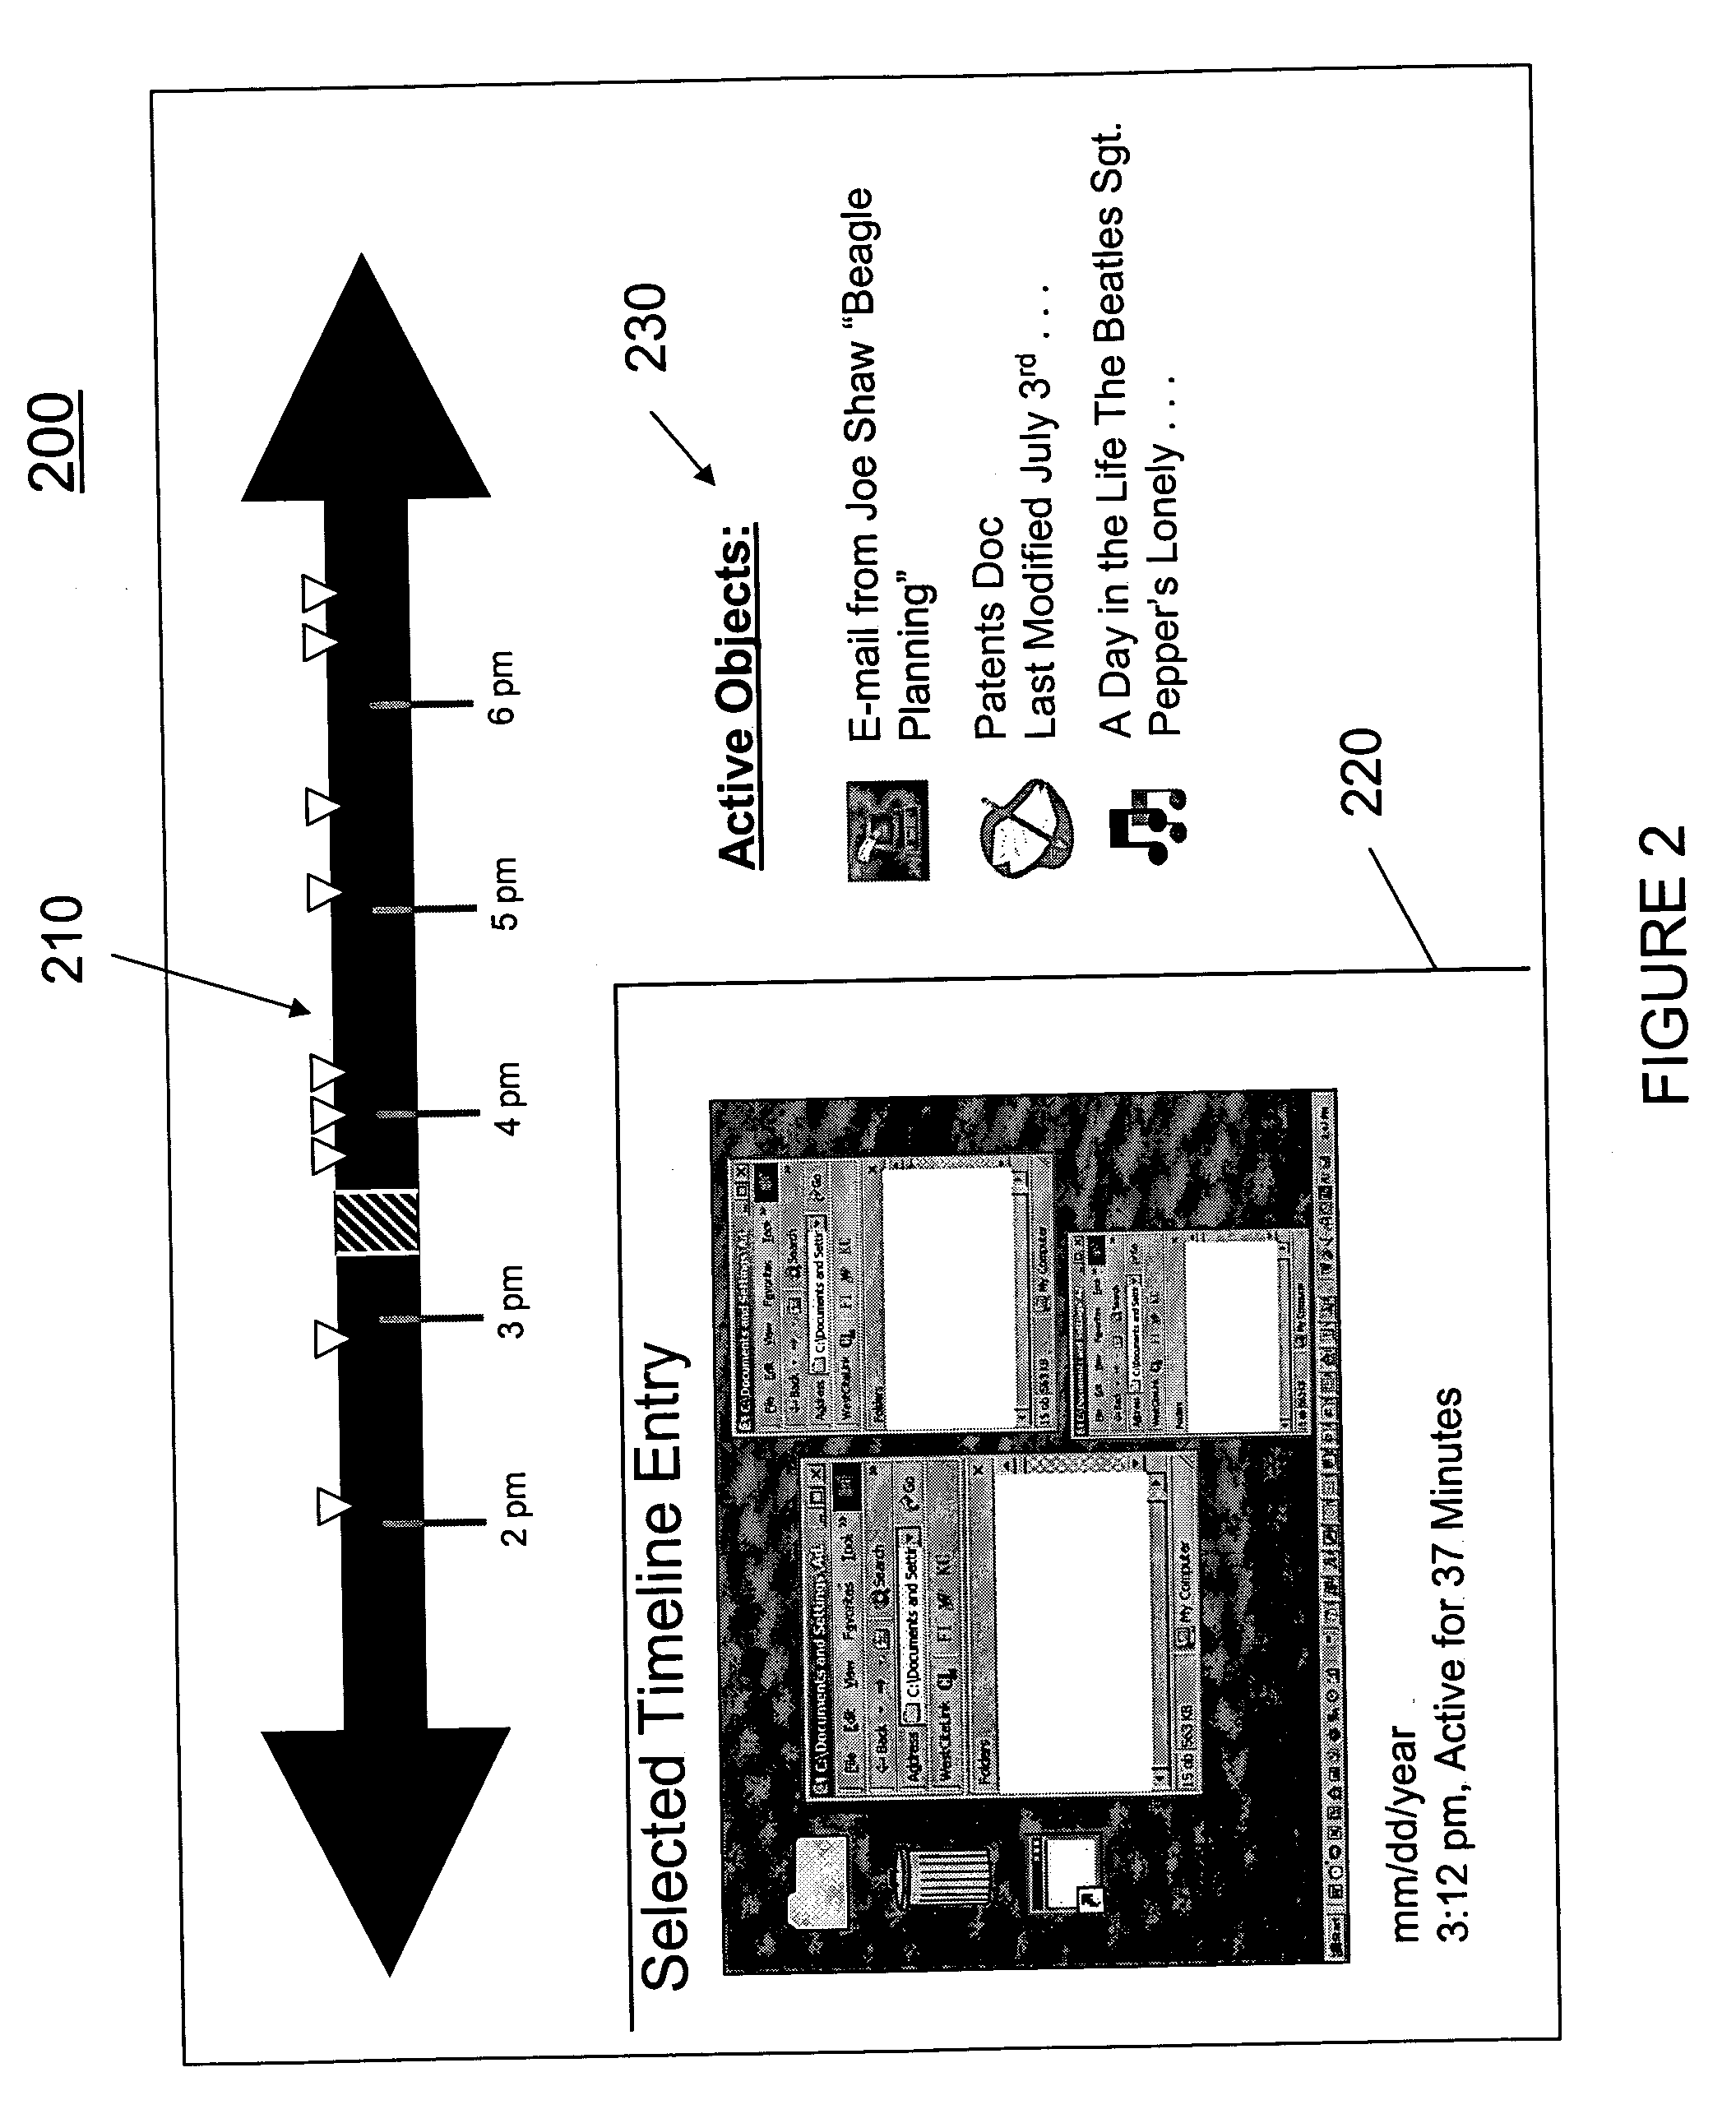 System and method of implementing user action monitoring to automatically populate object launchers